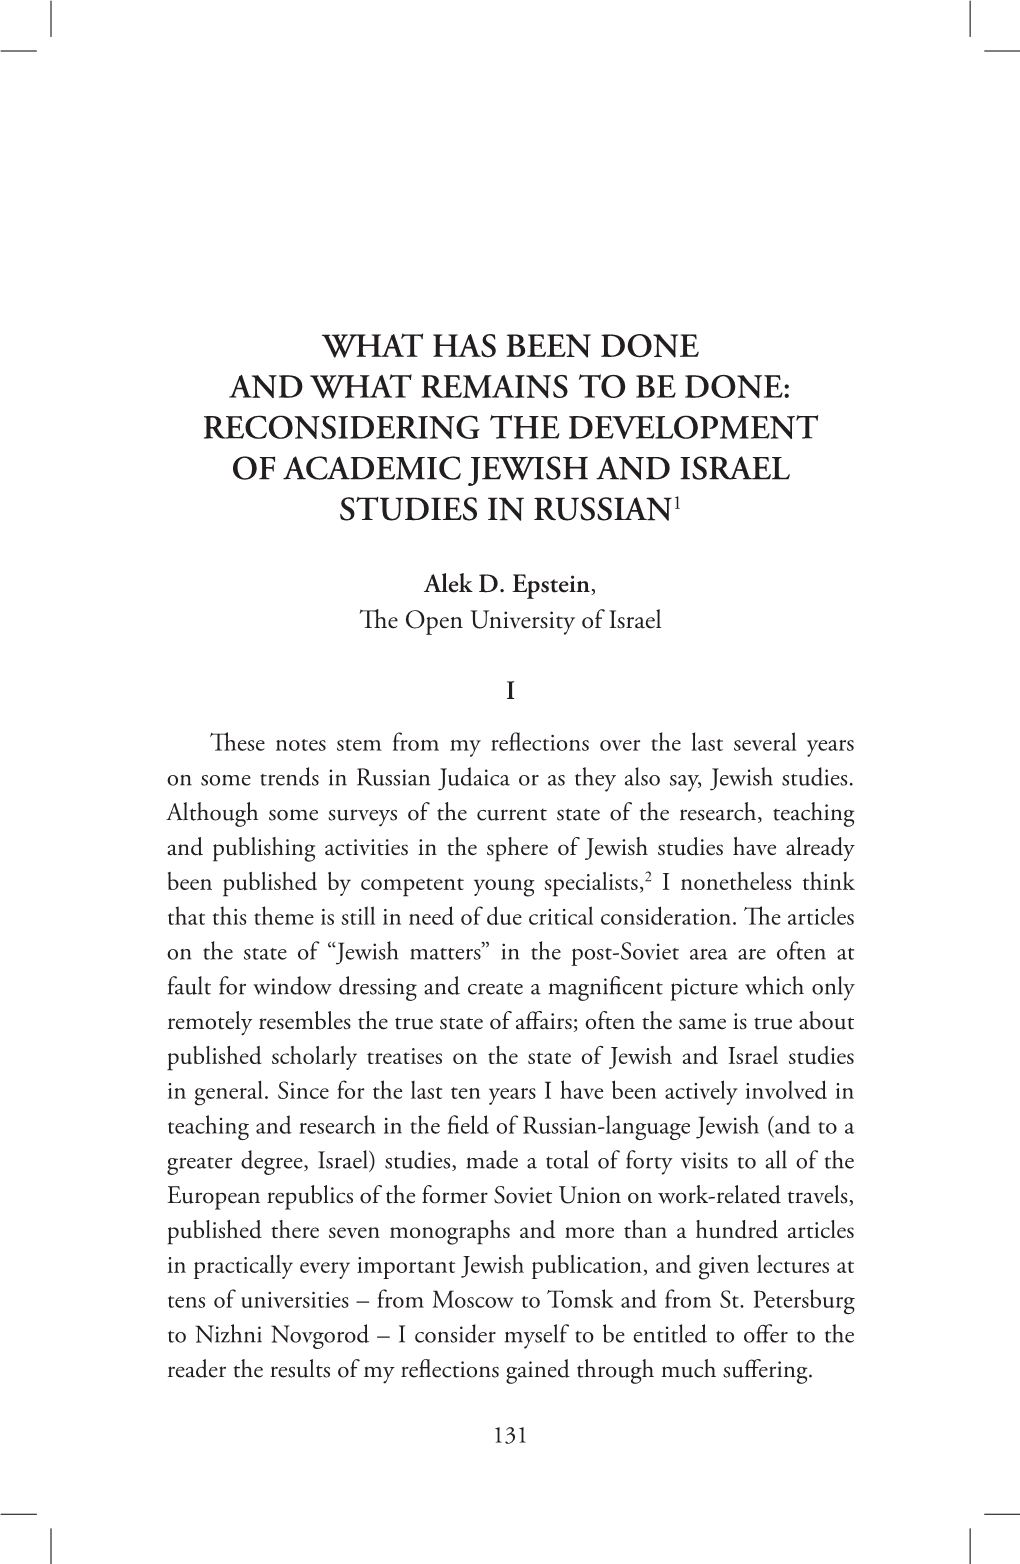 Reconsidering the Development of Academic Jewish and Israel Studies in Russian1